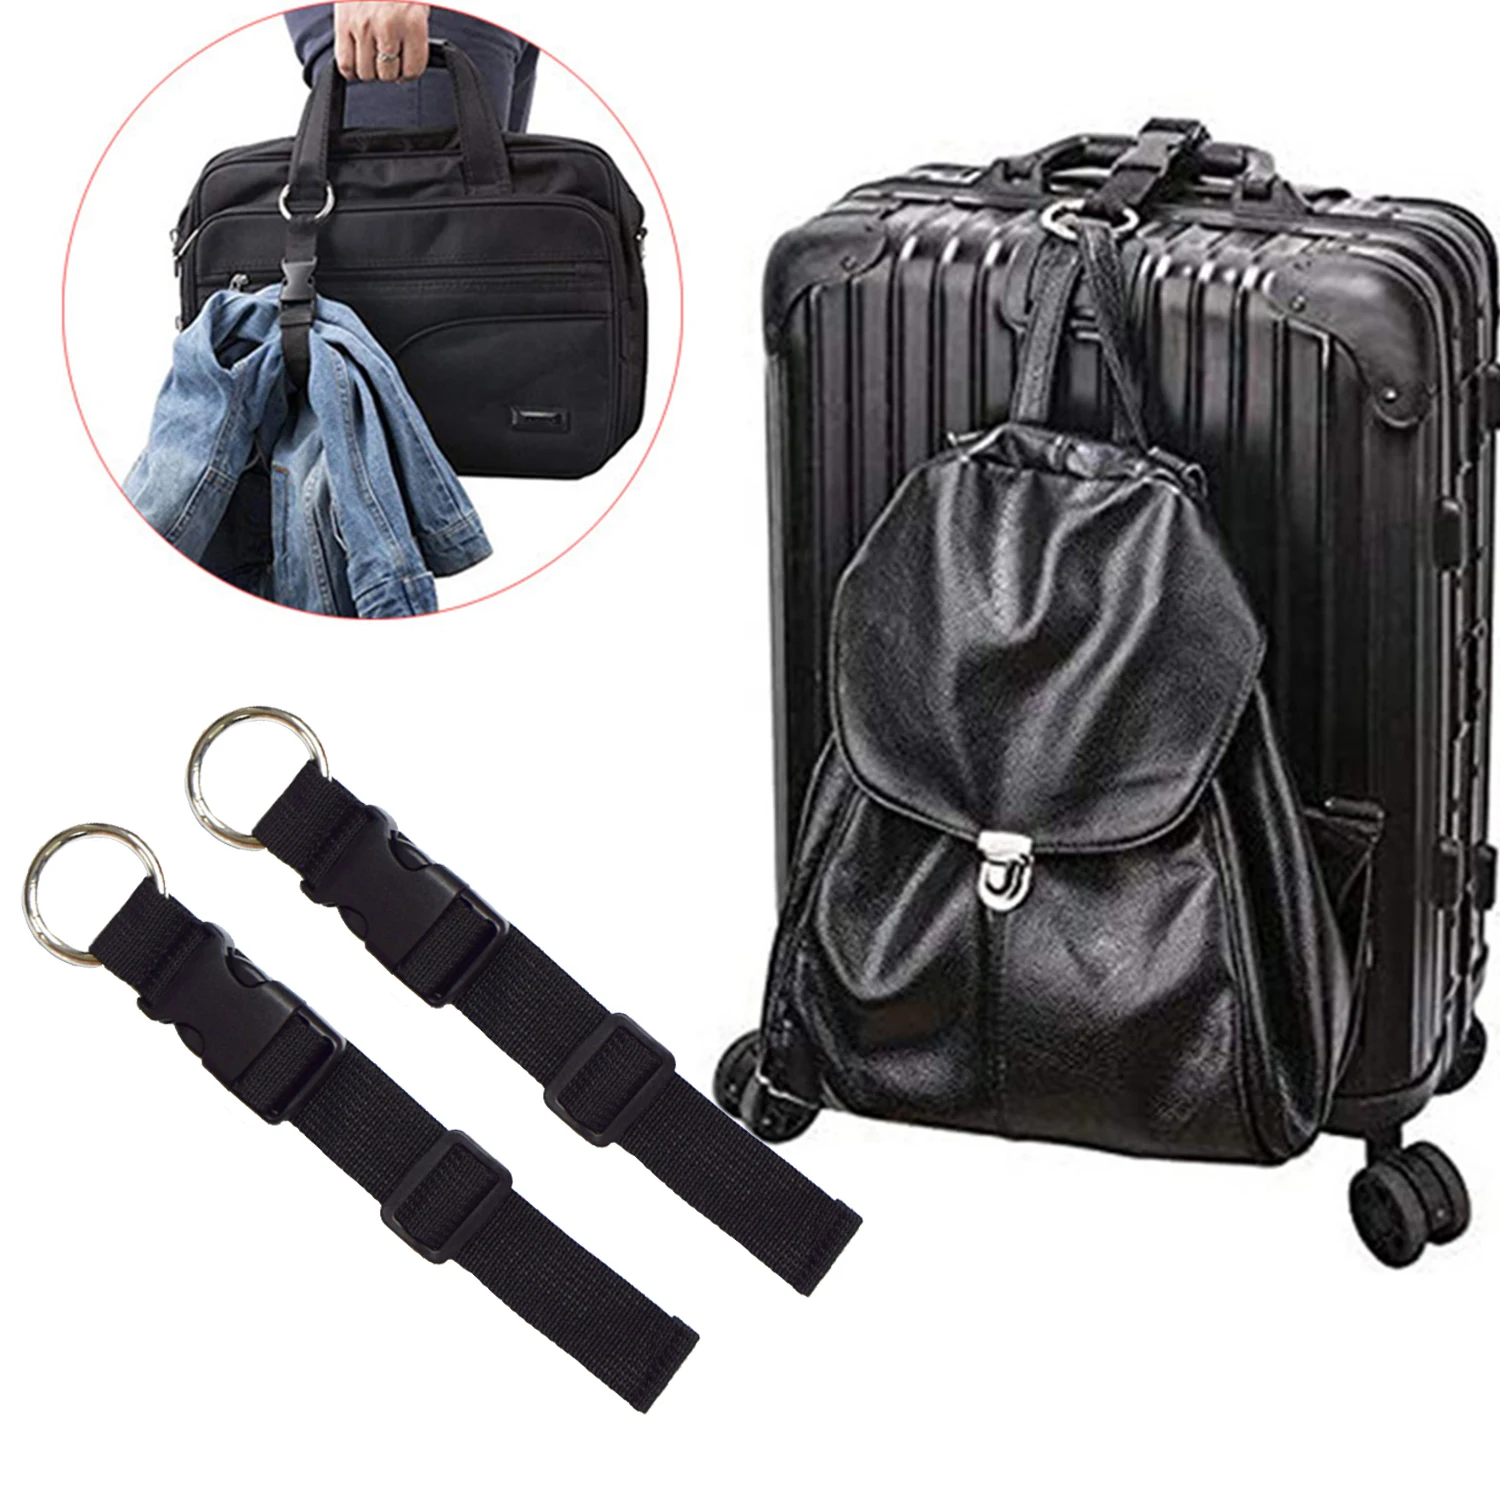 

1Pcs Portable Luggage Strap Travel Jacket Gripper Adjustable Suitcases Belt For Carry On Bags Add Bag Handbag Clip Use To Carry